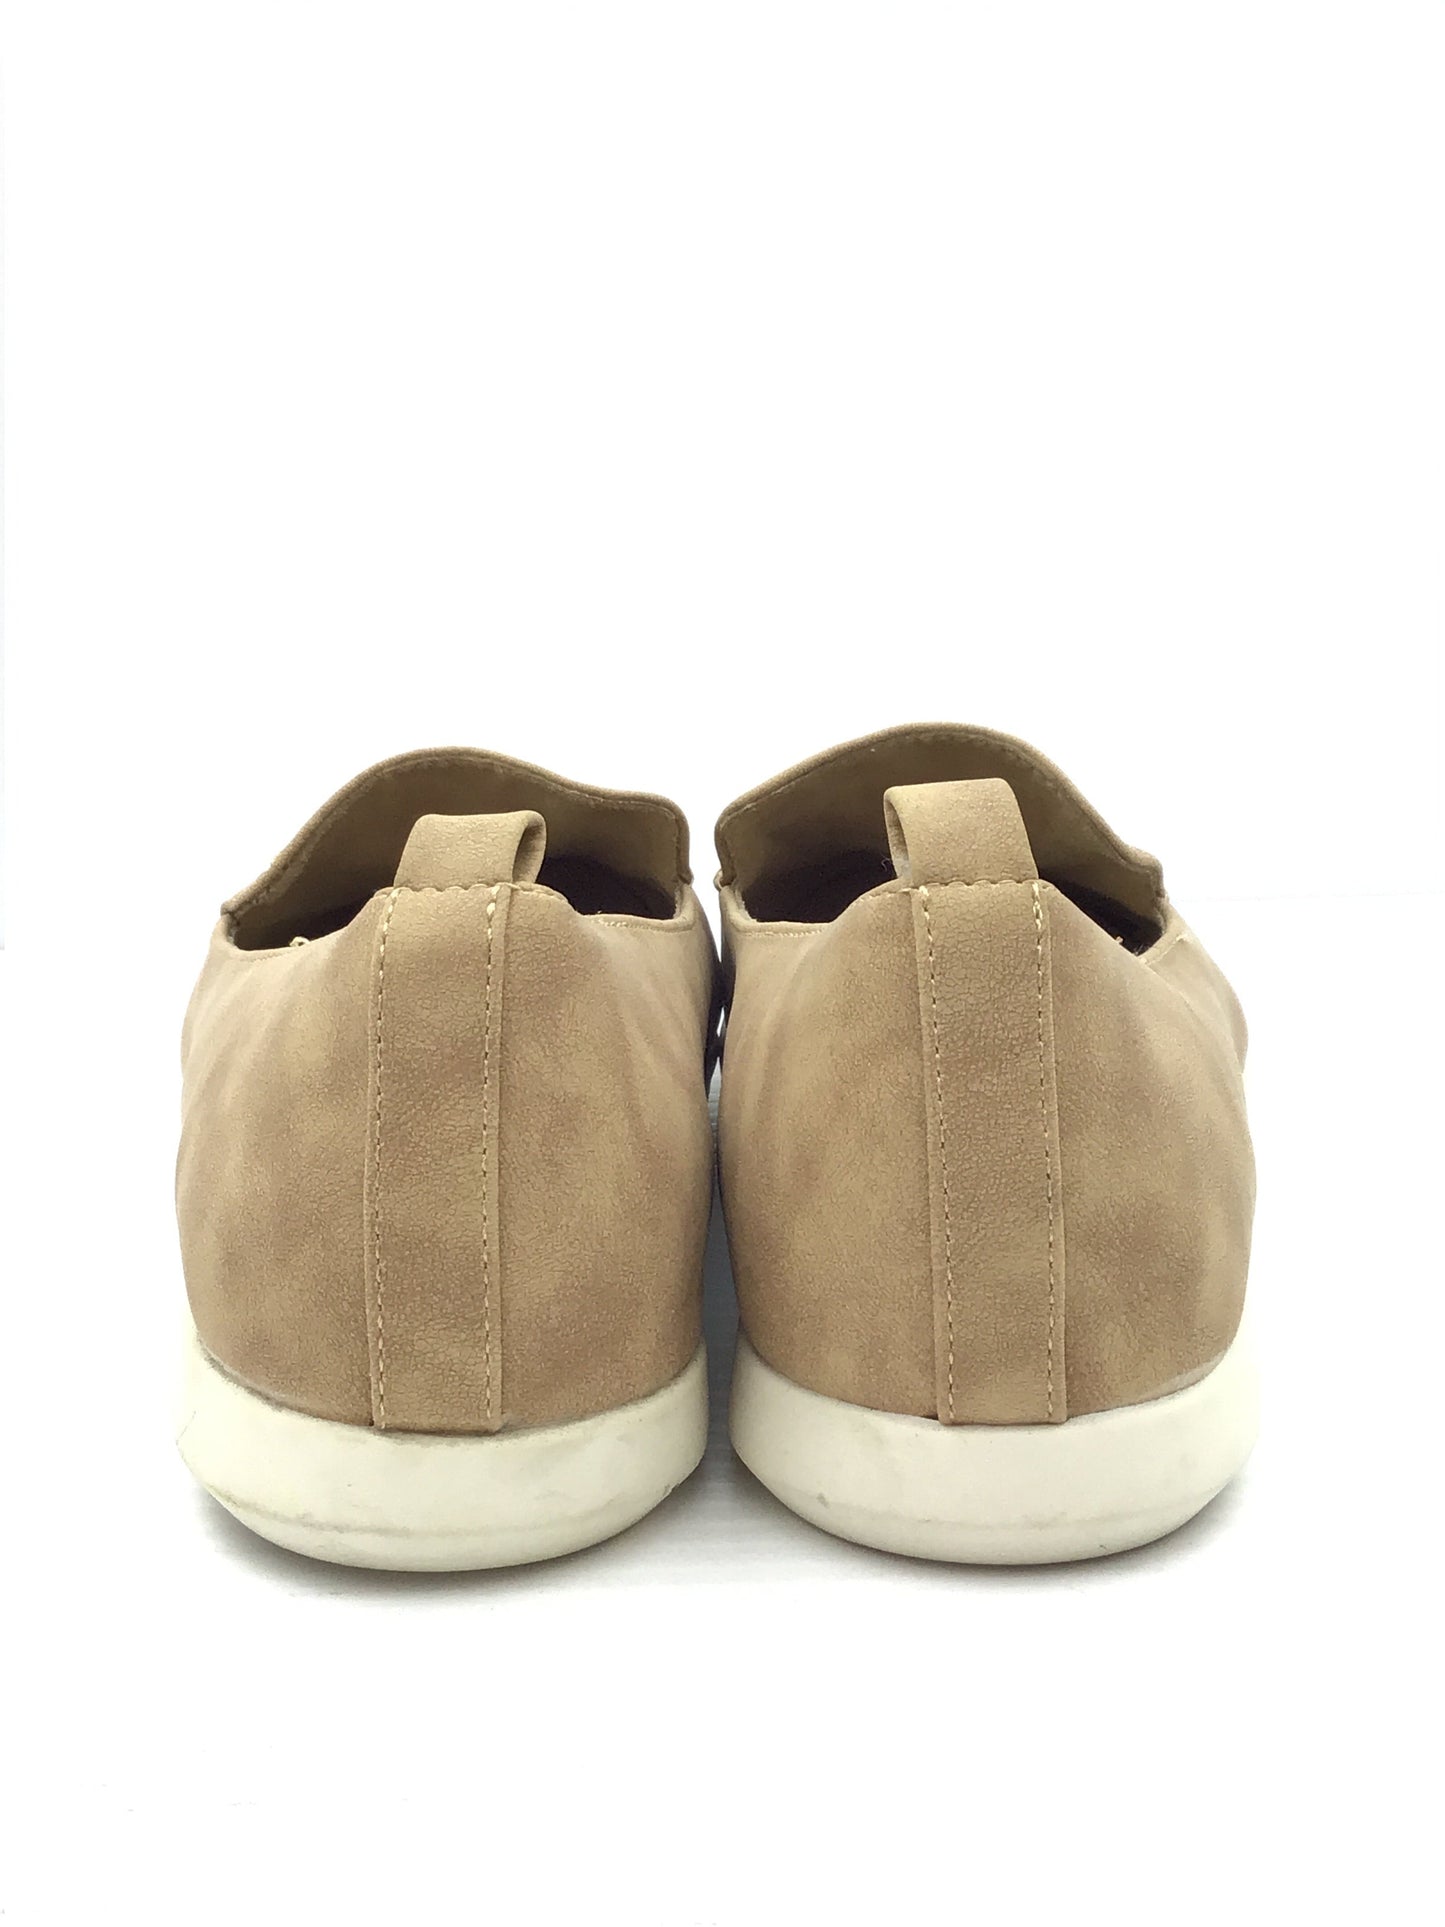 Shoes Sneakers By White Mountain  Size: 8